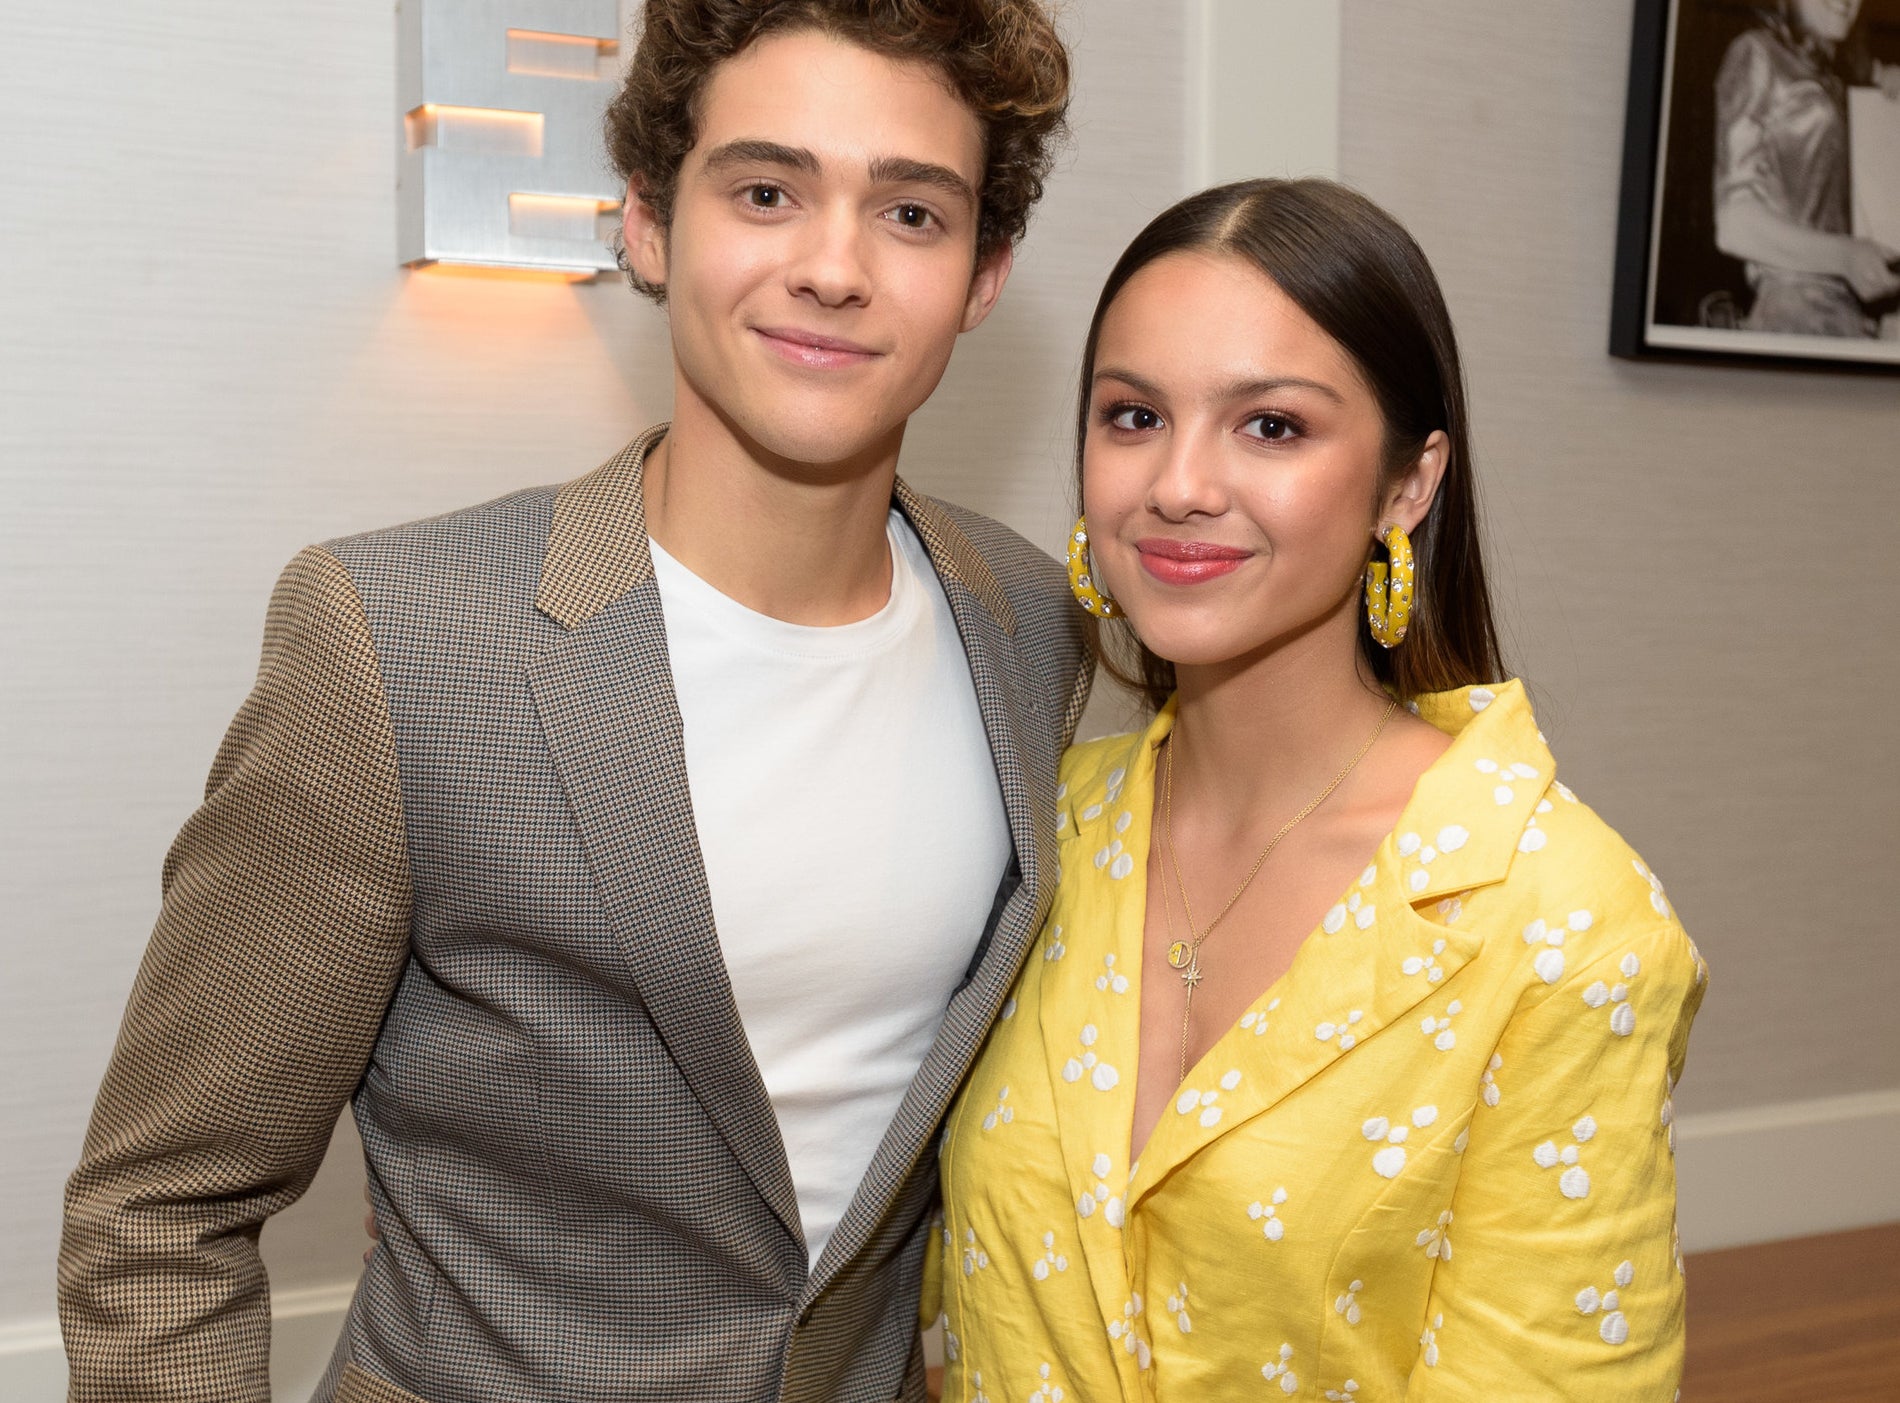 Joshua and Olivia pose together at an event